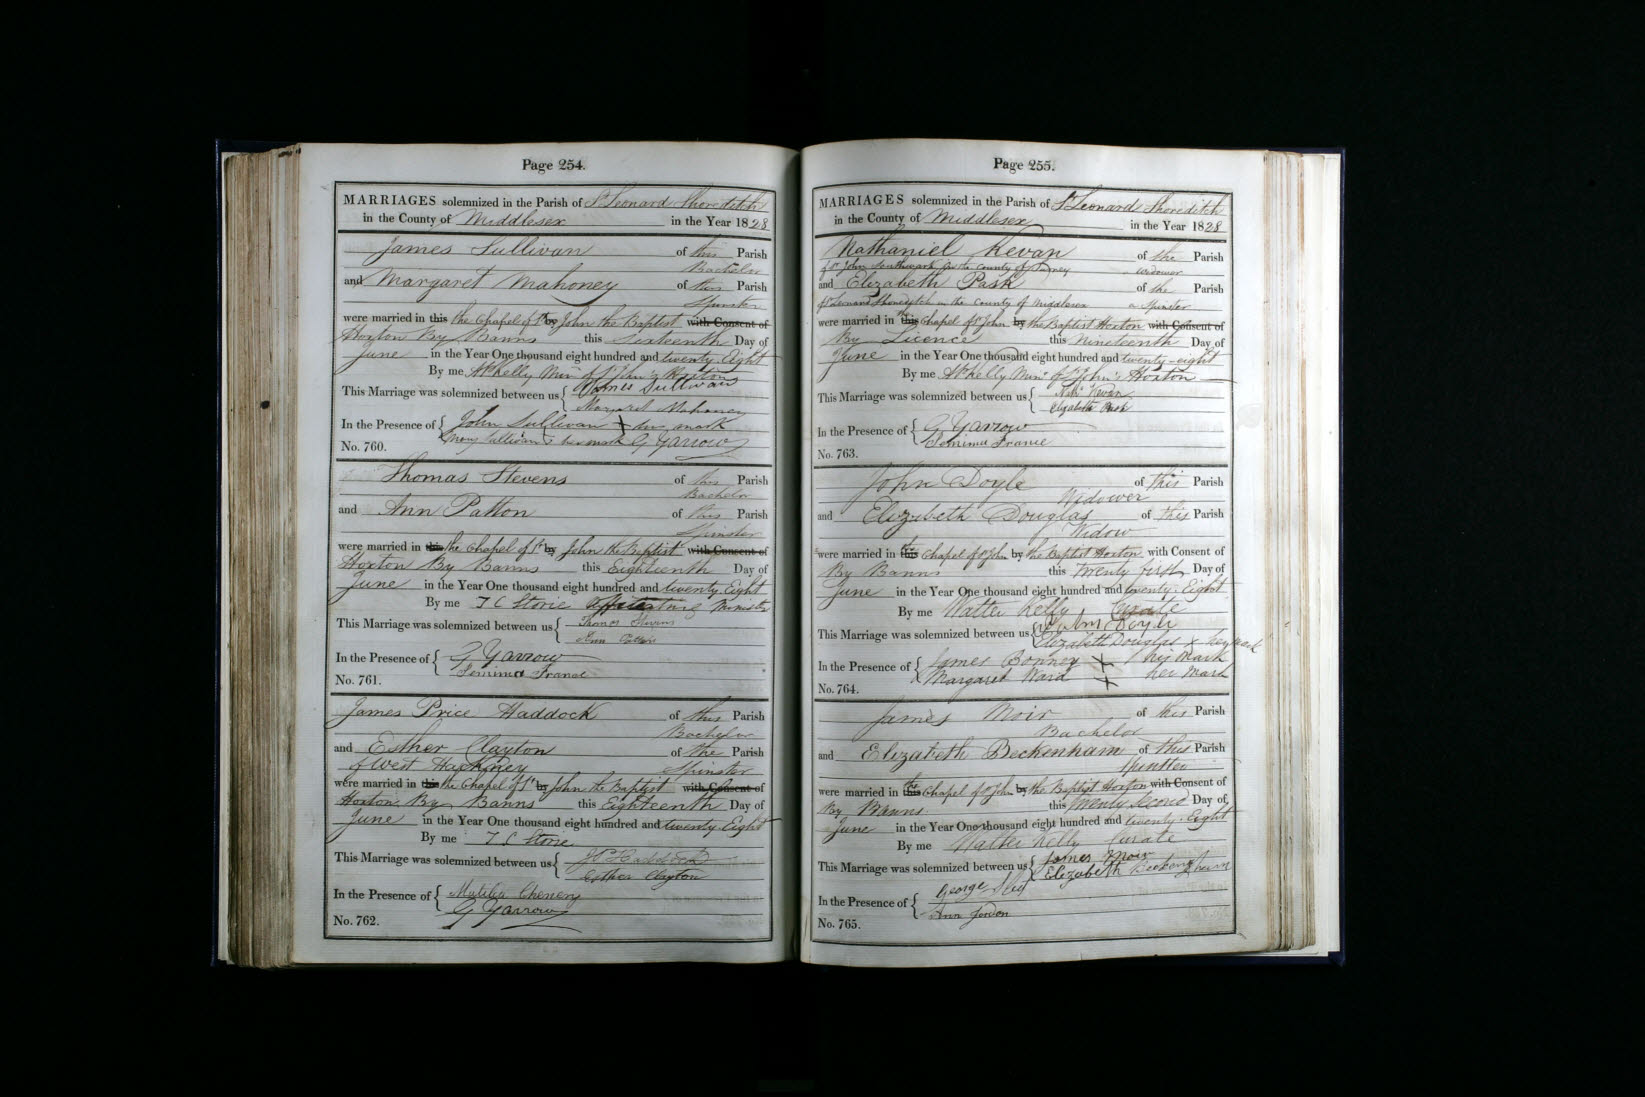 1828 marriage of Elizabeth Pask to Nathaniel Kevan